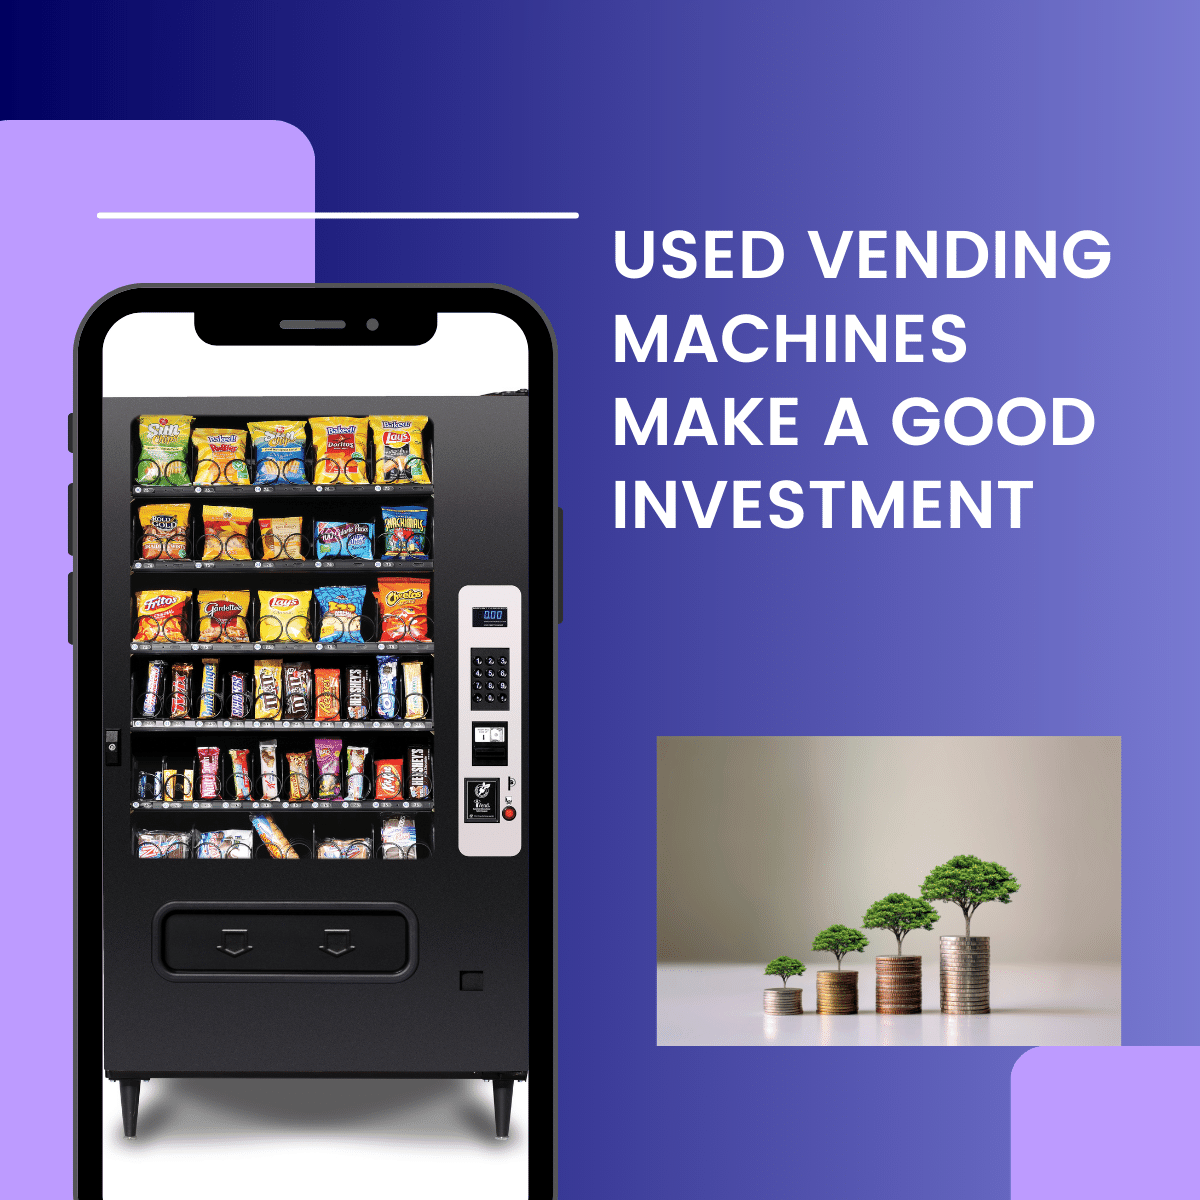 USED VENDING MACHINES MAKE A GOOD INVESTMENT